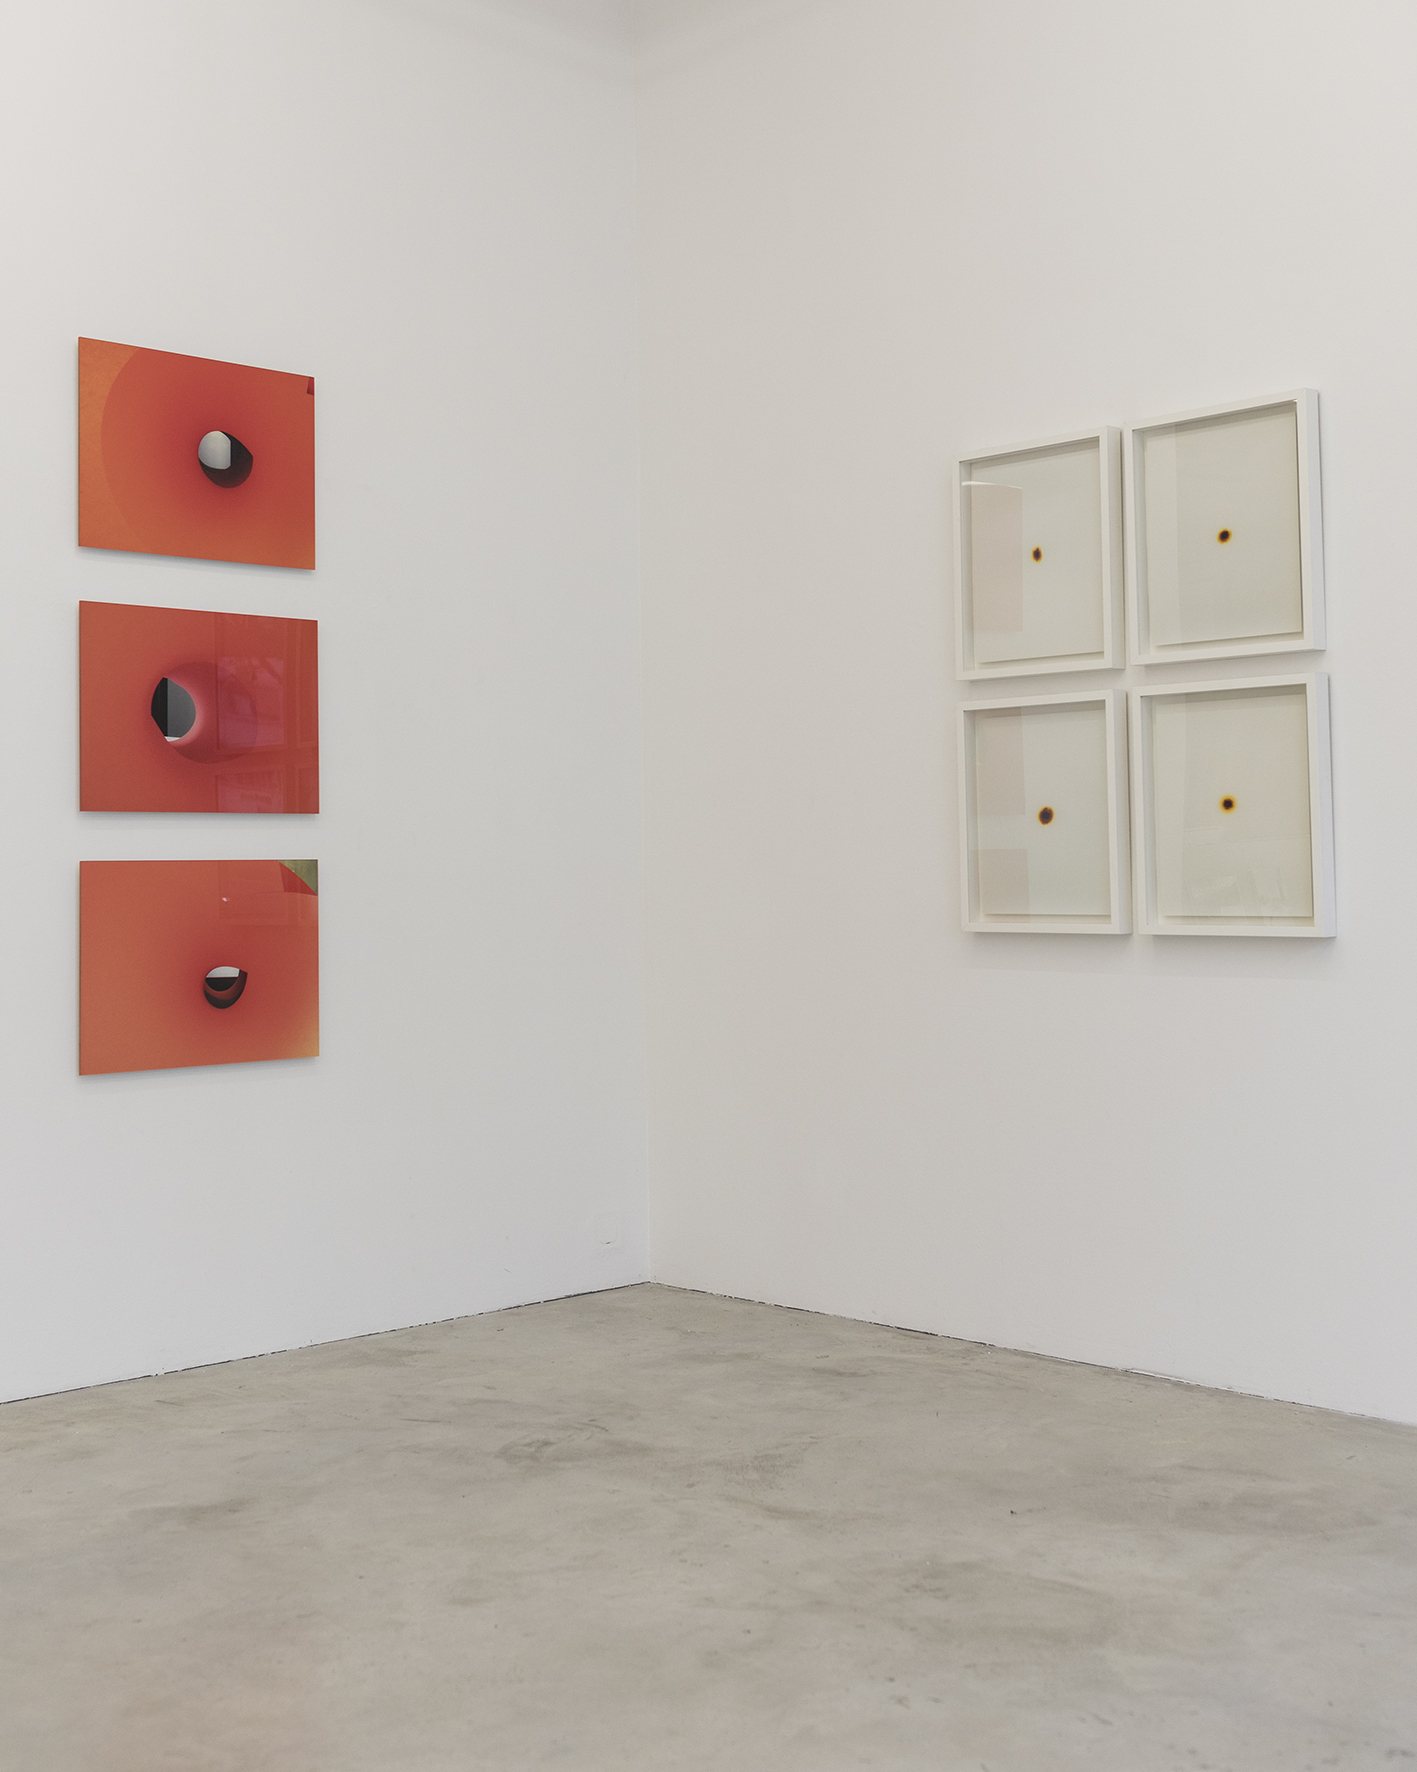 Installation view at Persons Projects, Berlin, 2019